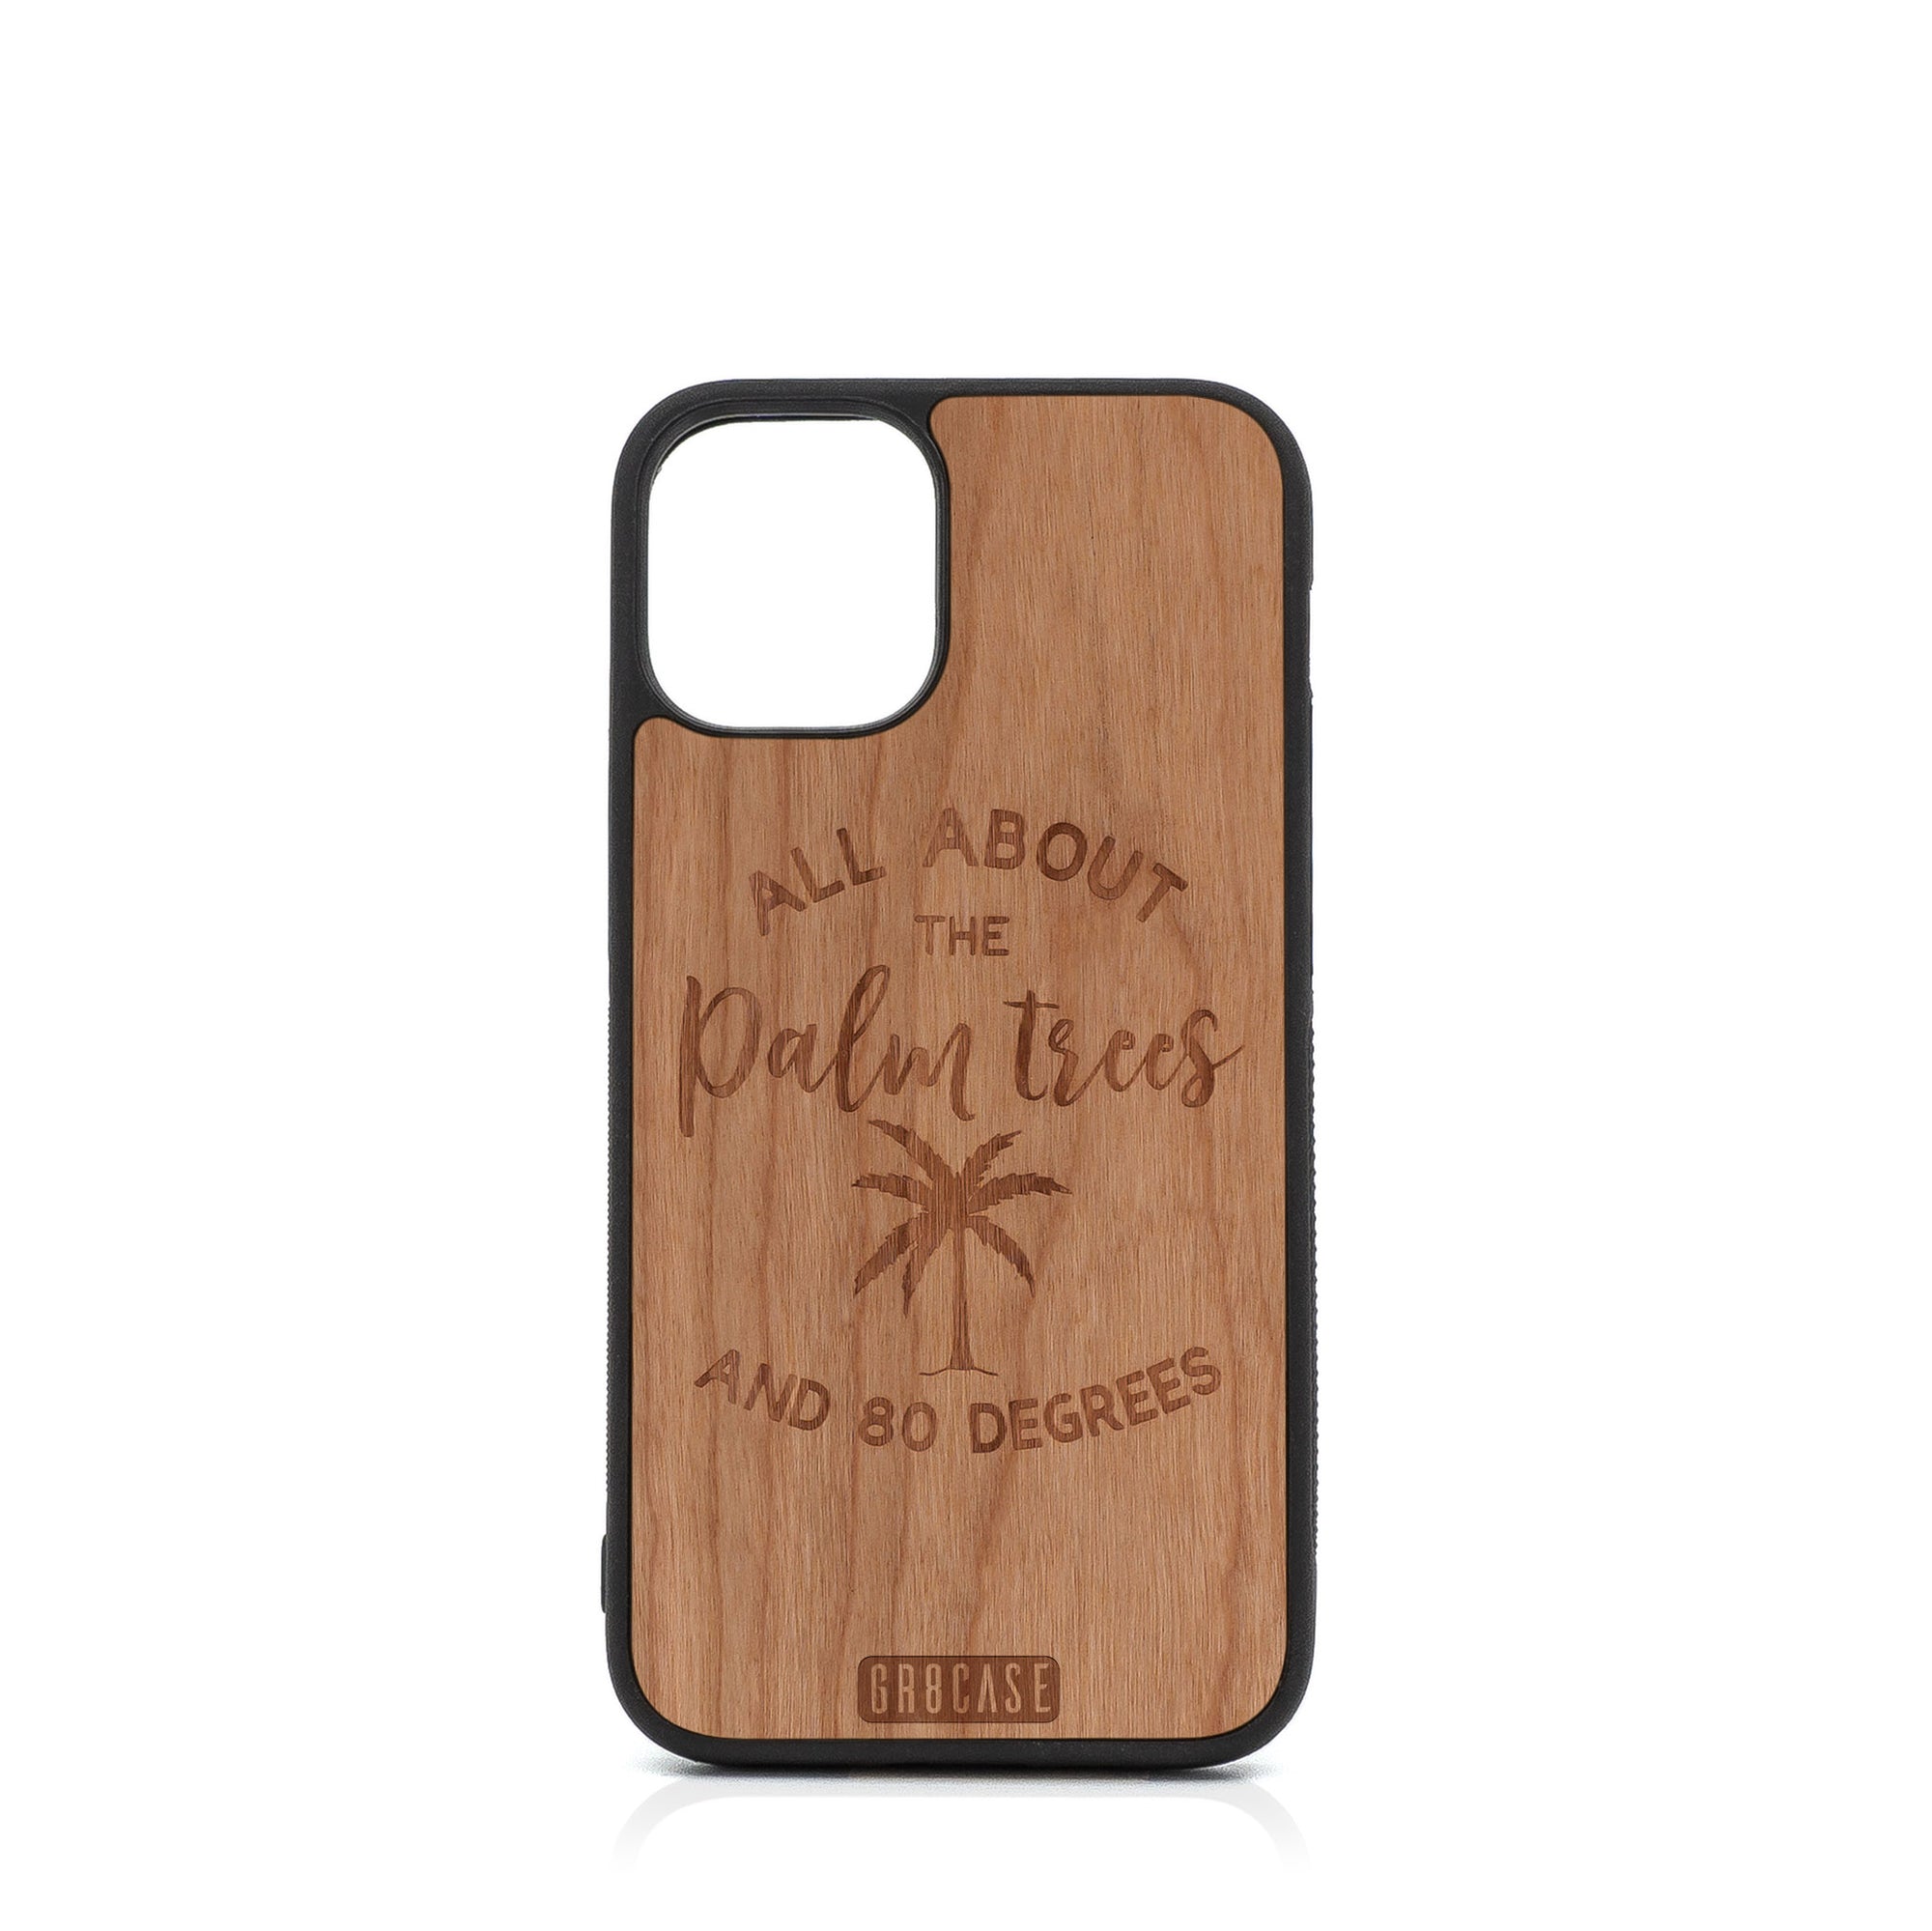 All About The Palm Trees And 80 Degrees Design Wood Case For iPhone 12 Mini